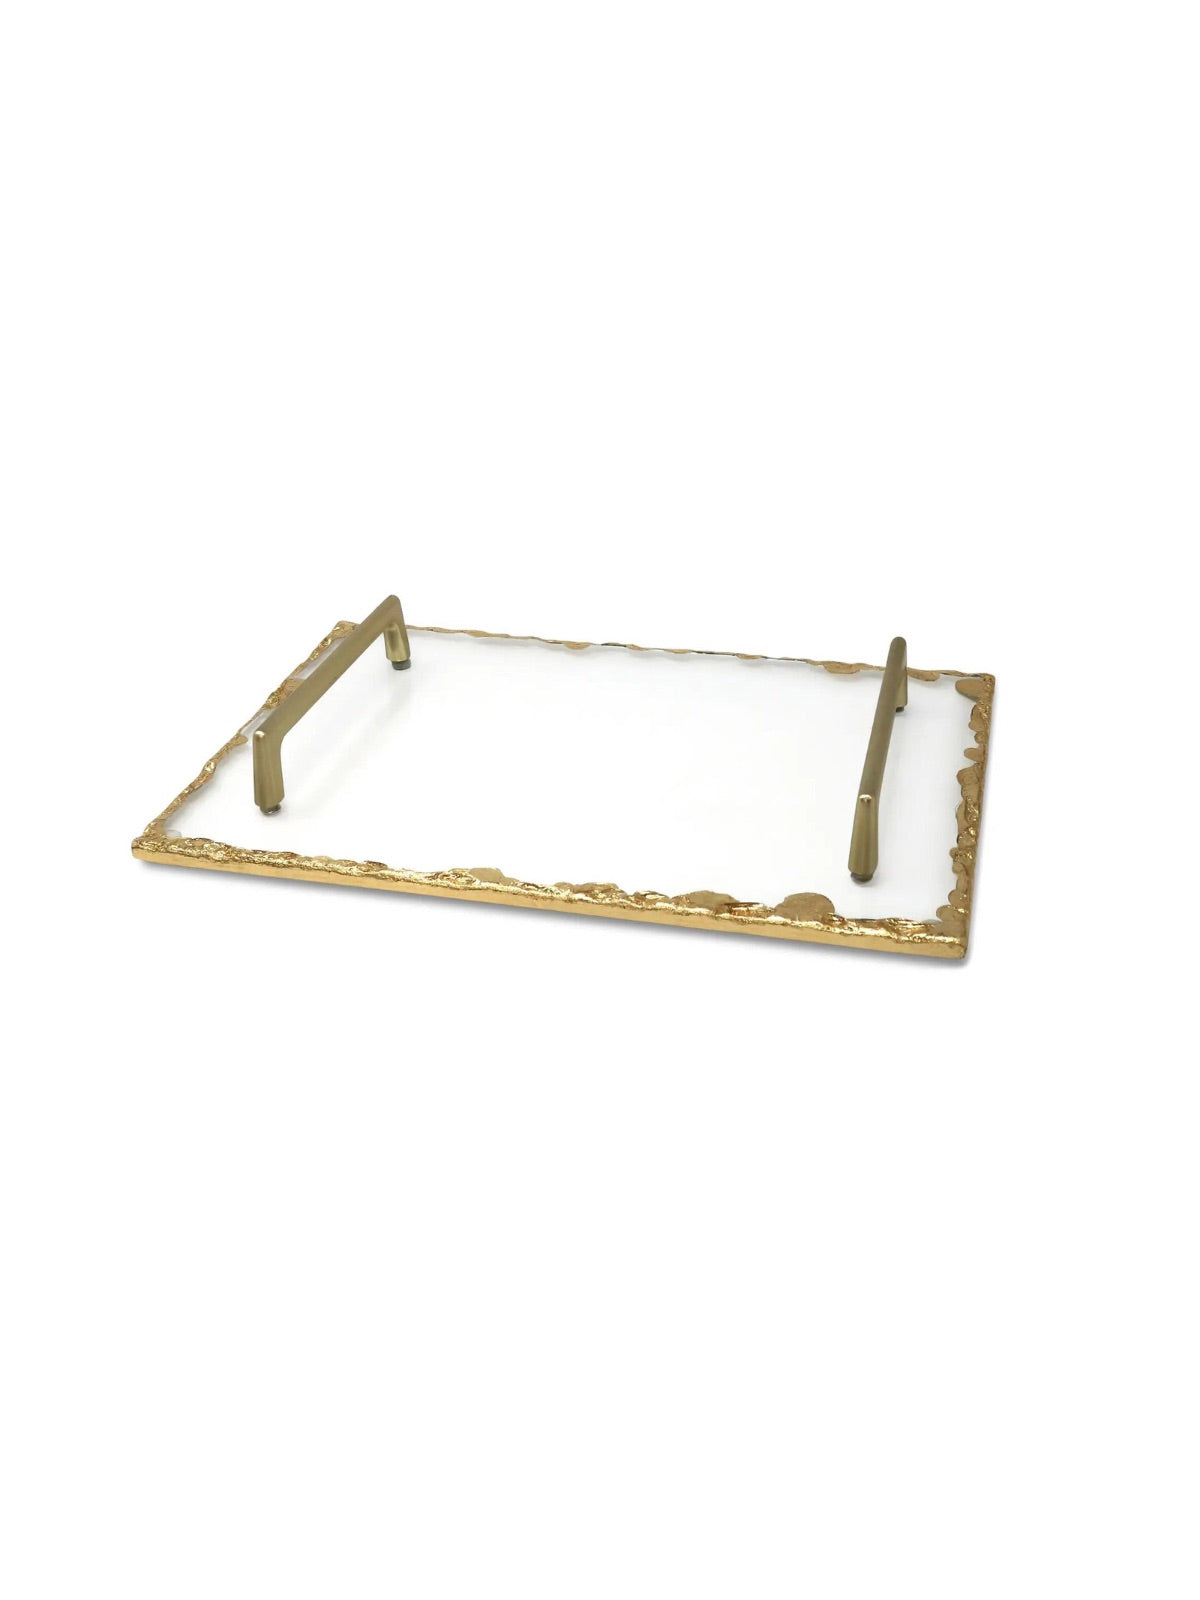 Glass Tray with Gold Rim and Handles Sold by KYA Home Decor.